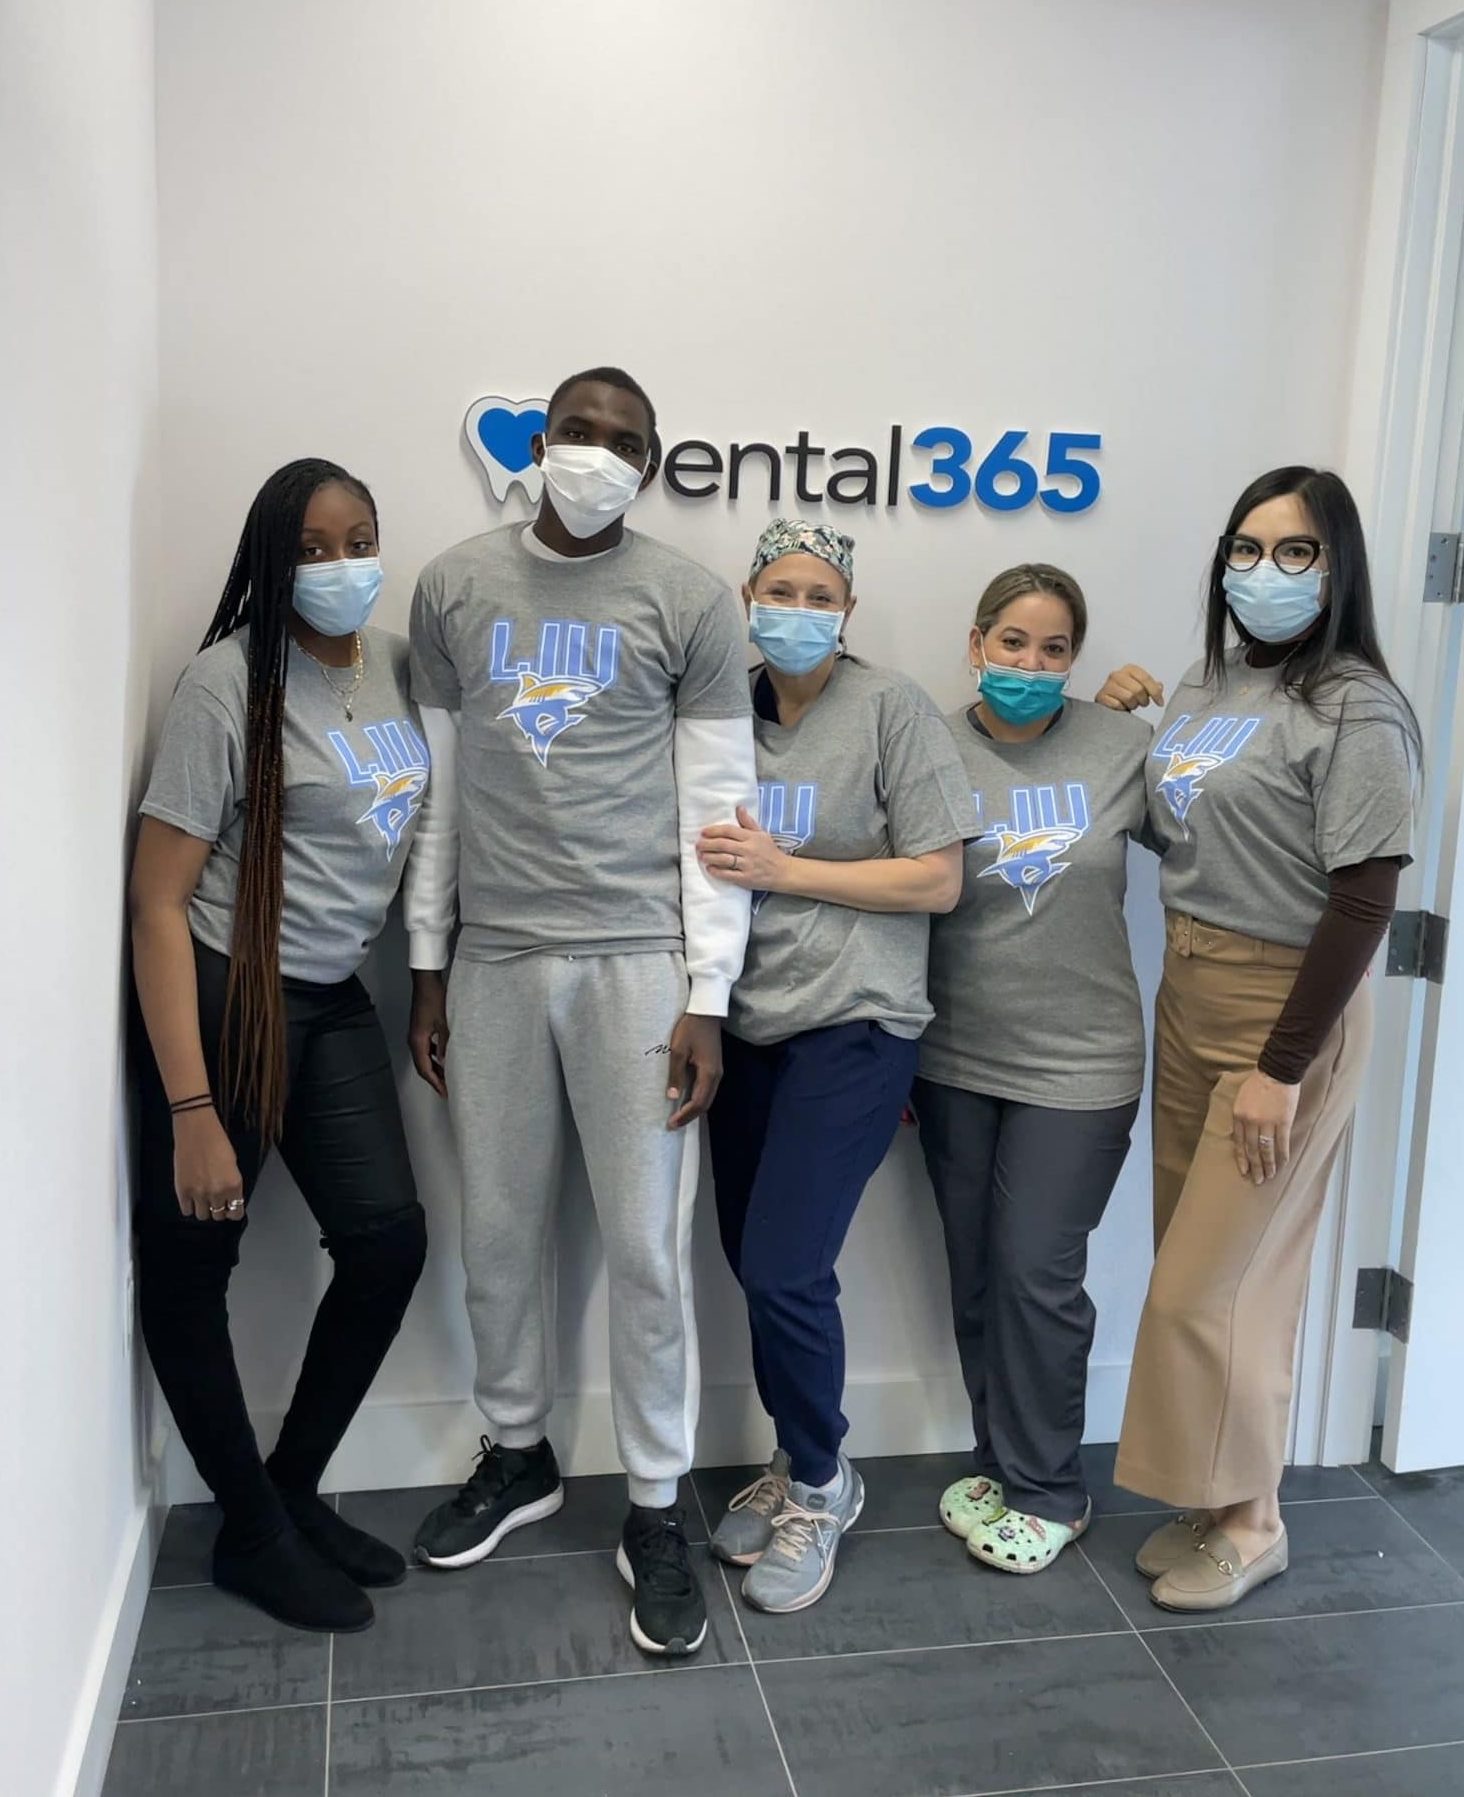 Dental365 Volunteers to Donate Dental Care to Local LIU Post Soccer Player